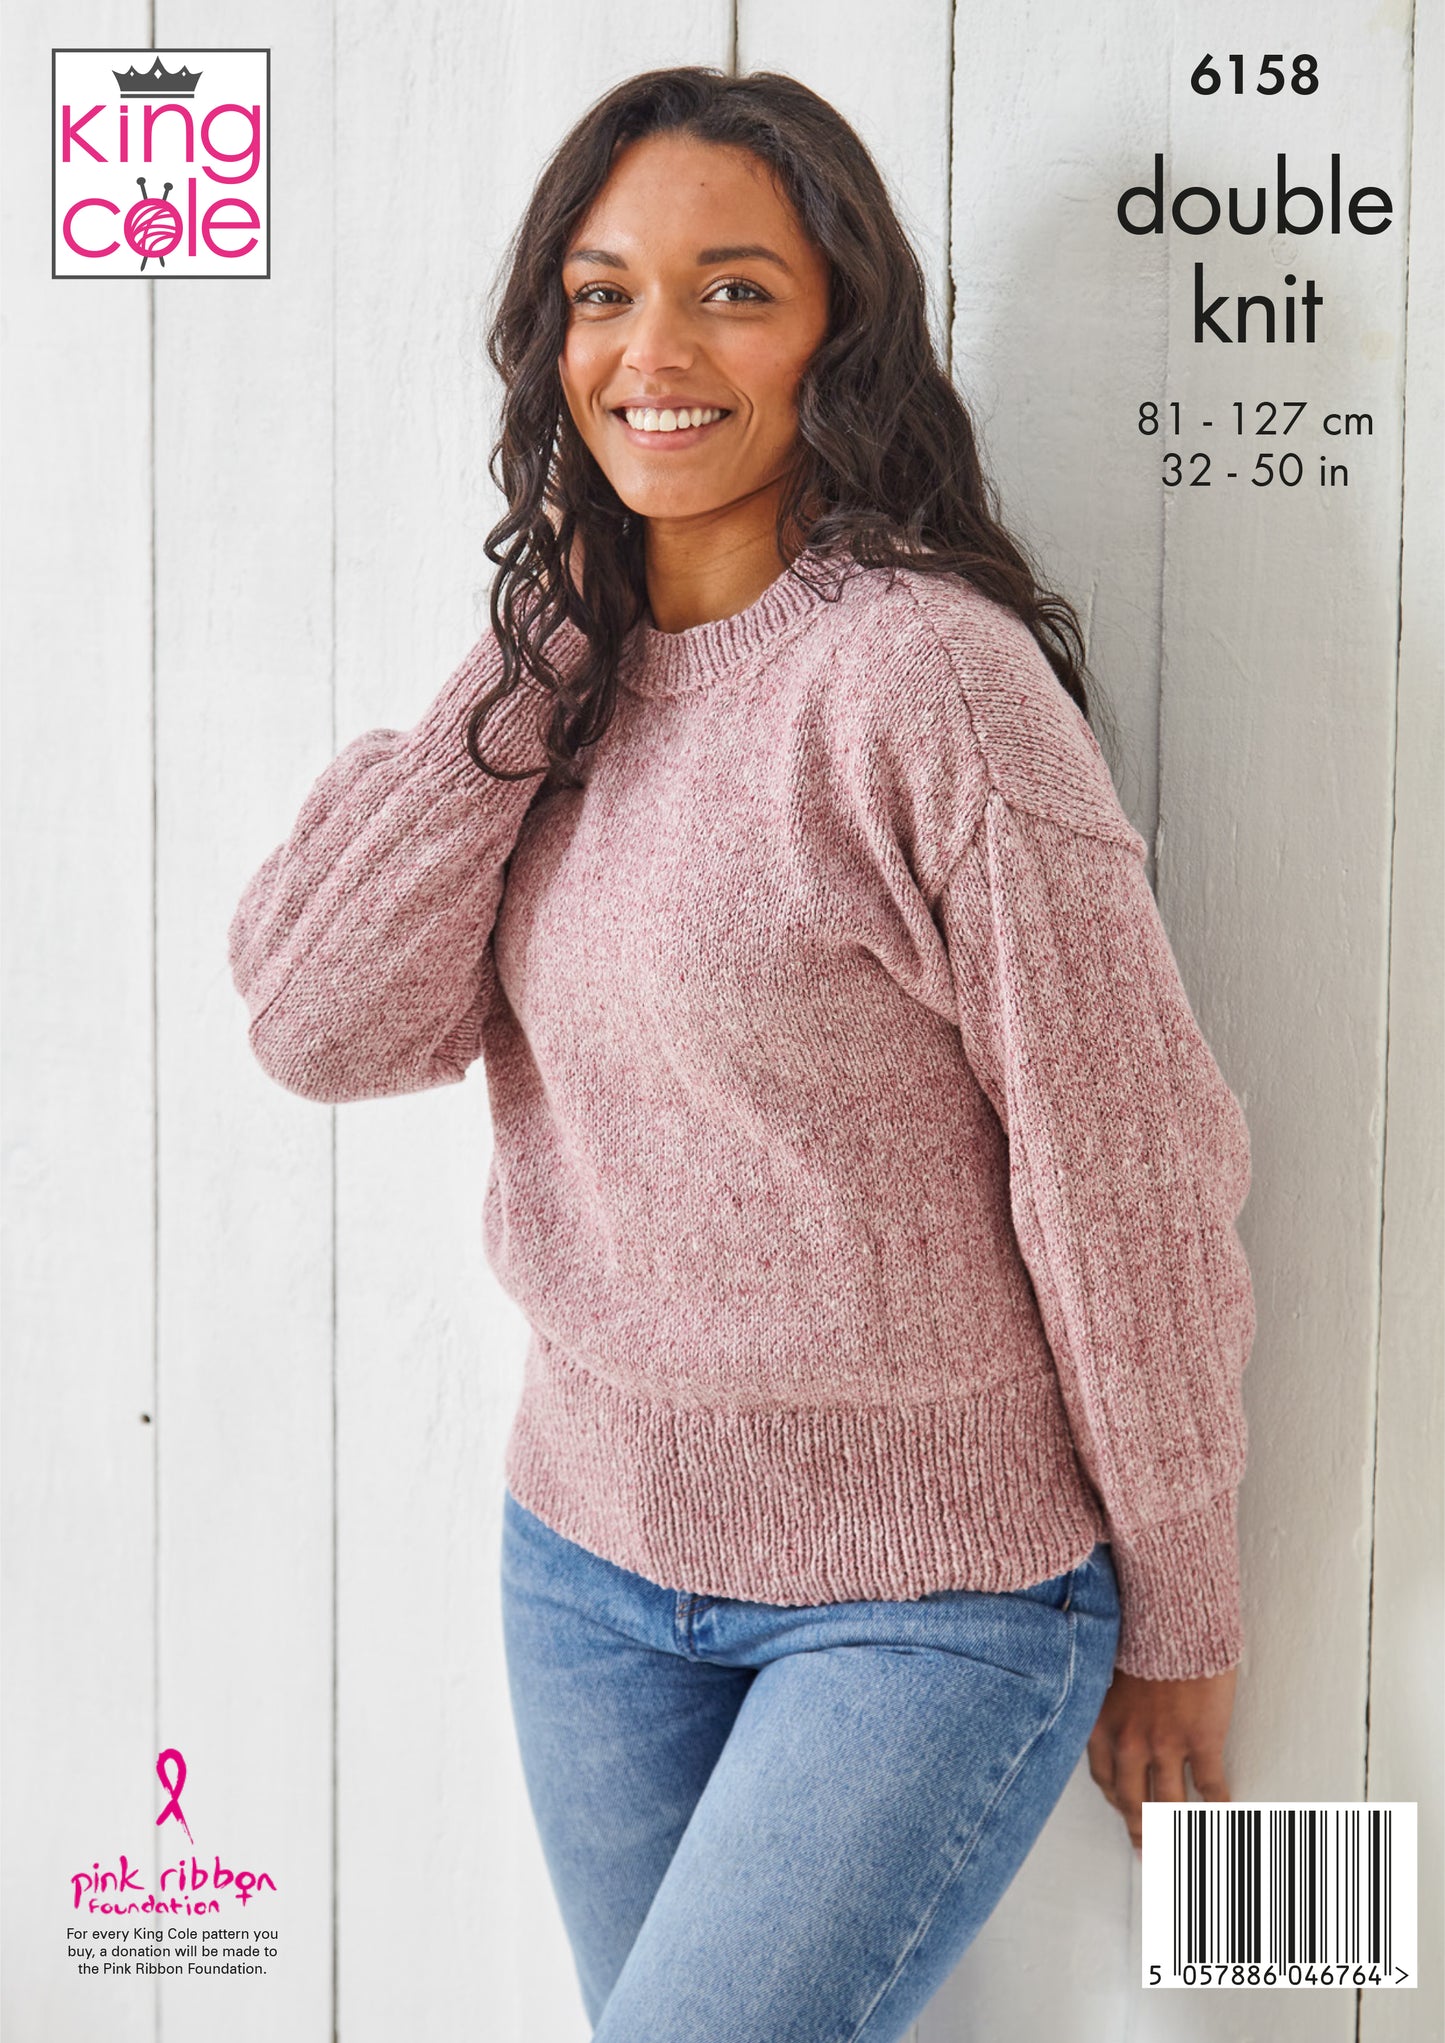 Sweater & Cardigan Knitted in King Cole Simply Denim DK - 6158